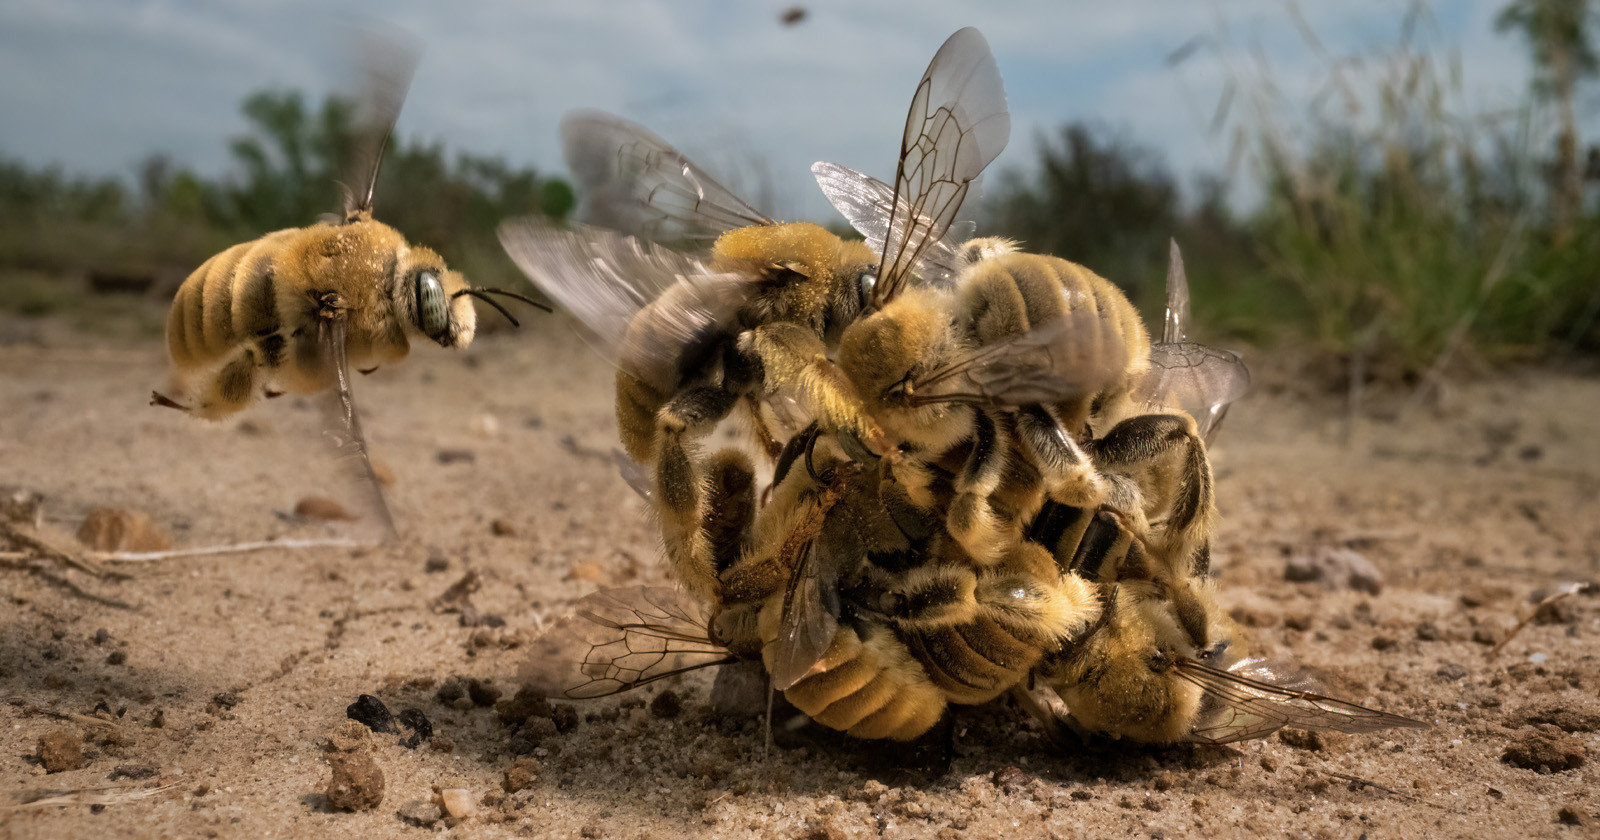 Buzzing Ball of Cactus Bees Wins Wildlife Photographer of the Year